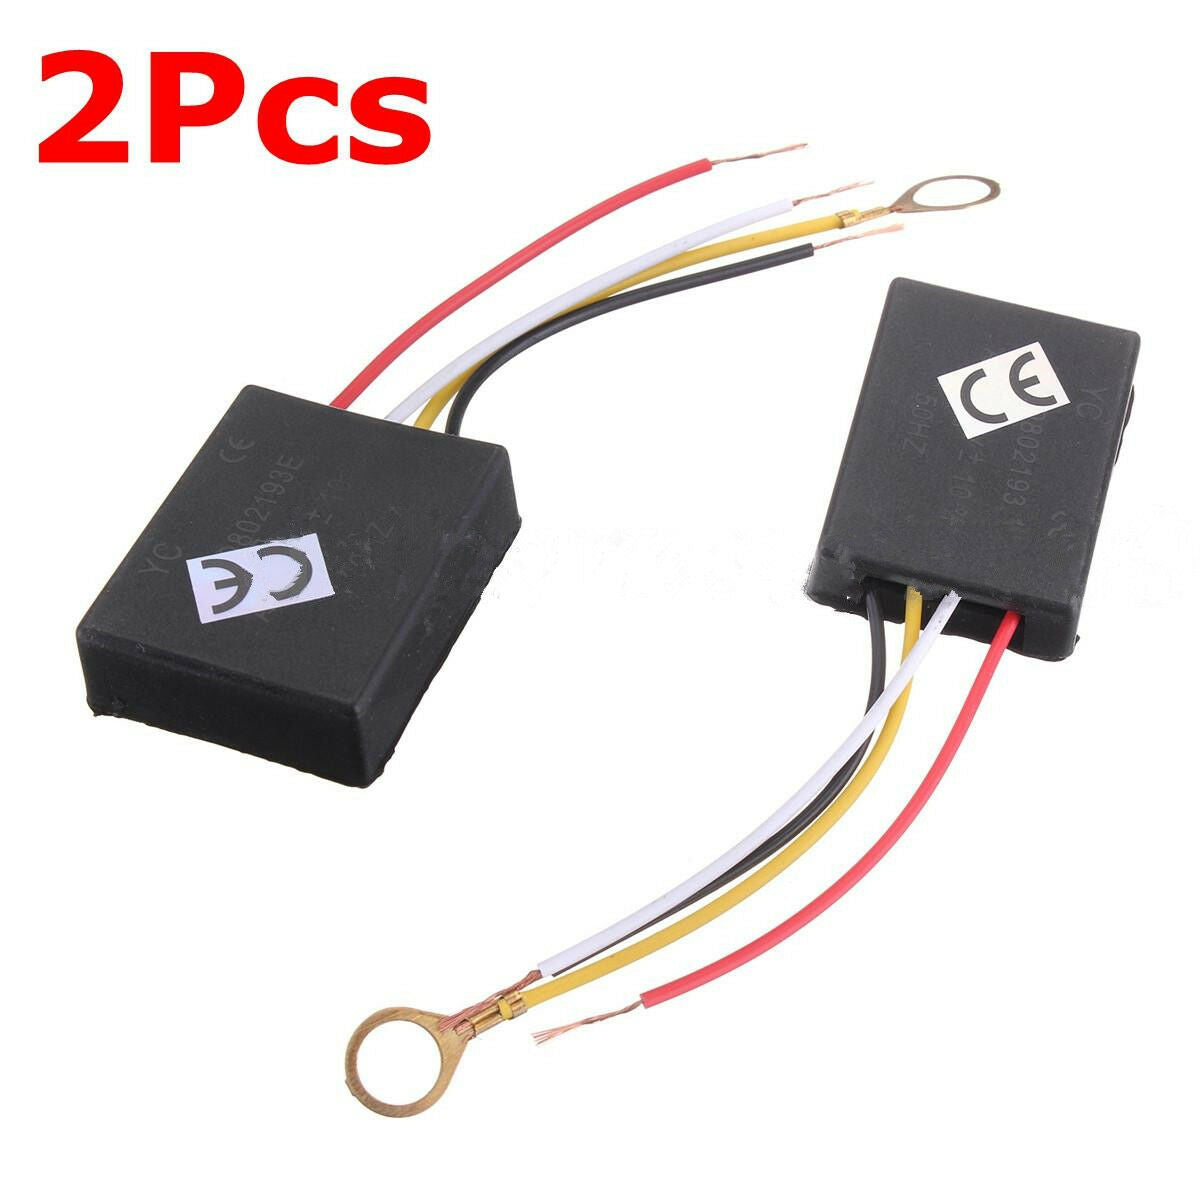 2x 3 Way Touch Light Sensor Switch Control For Lamp Desk Bulb Dimmer Repai.l8